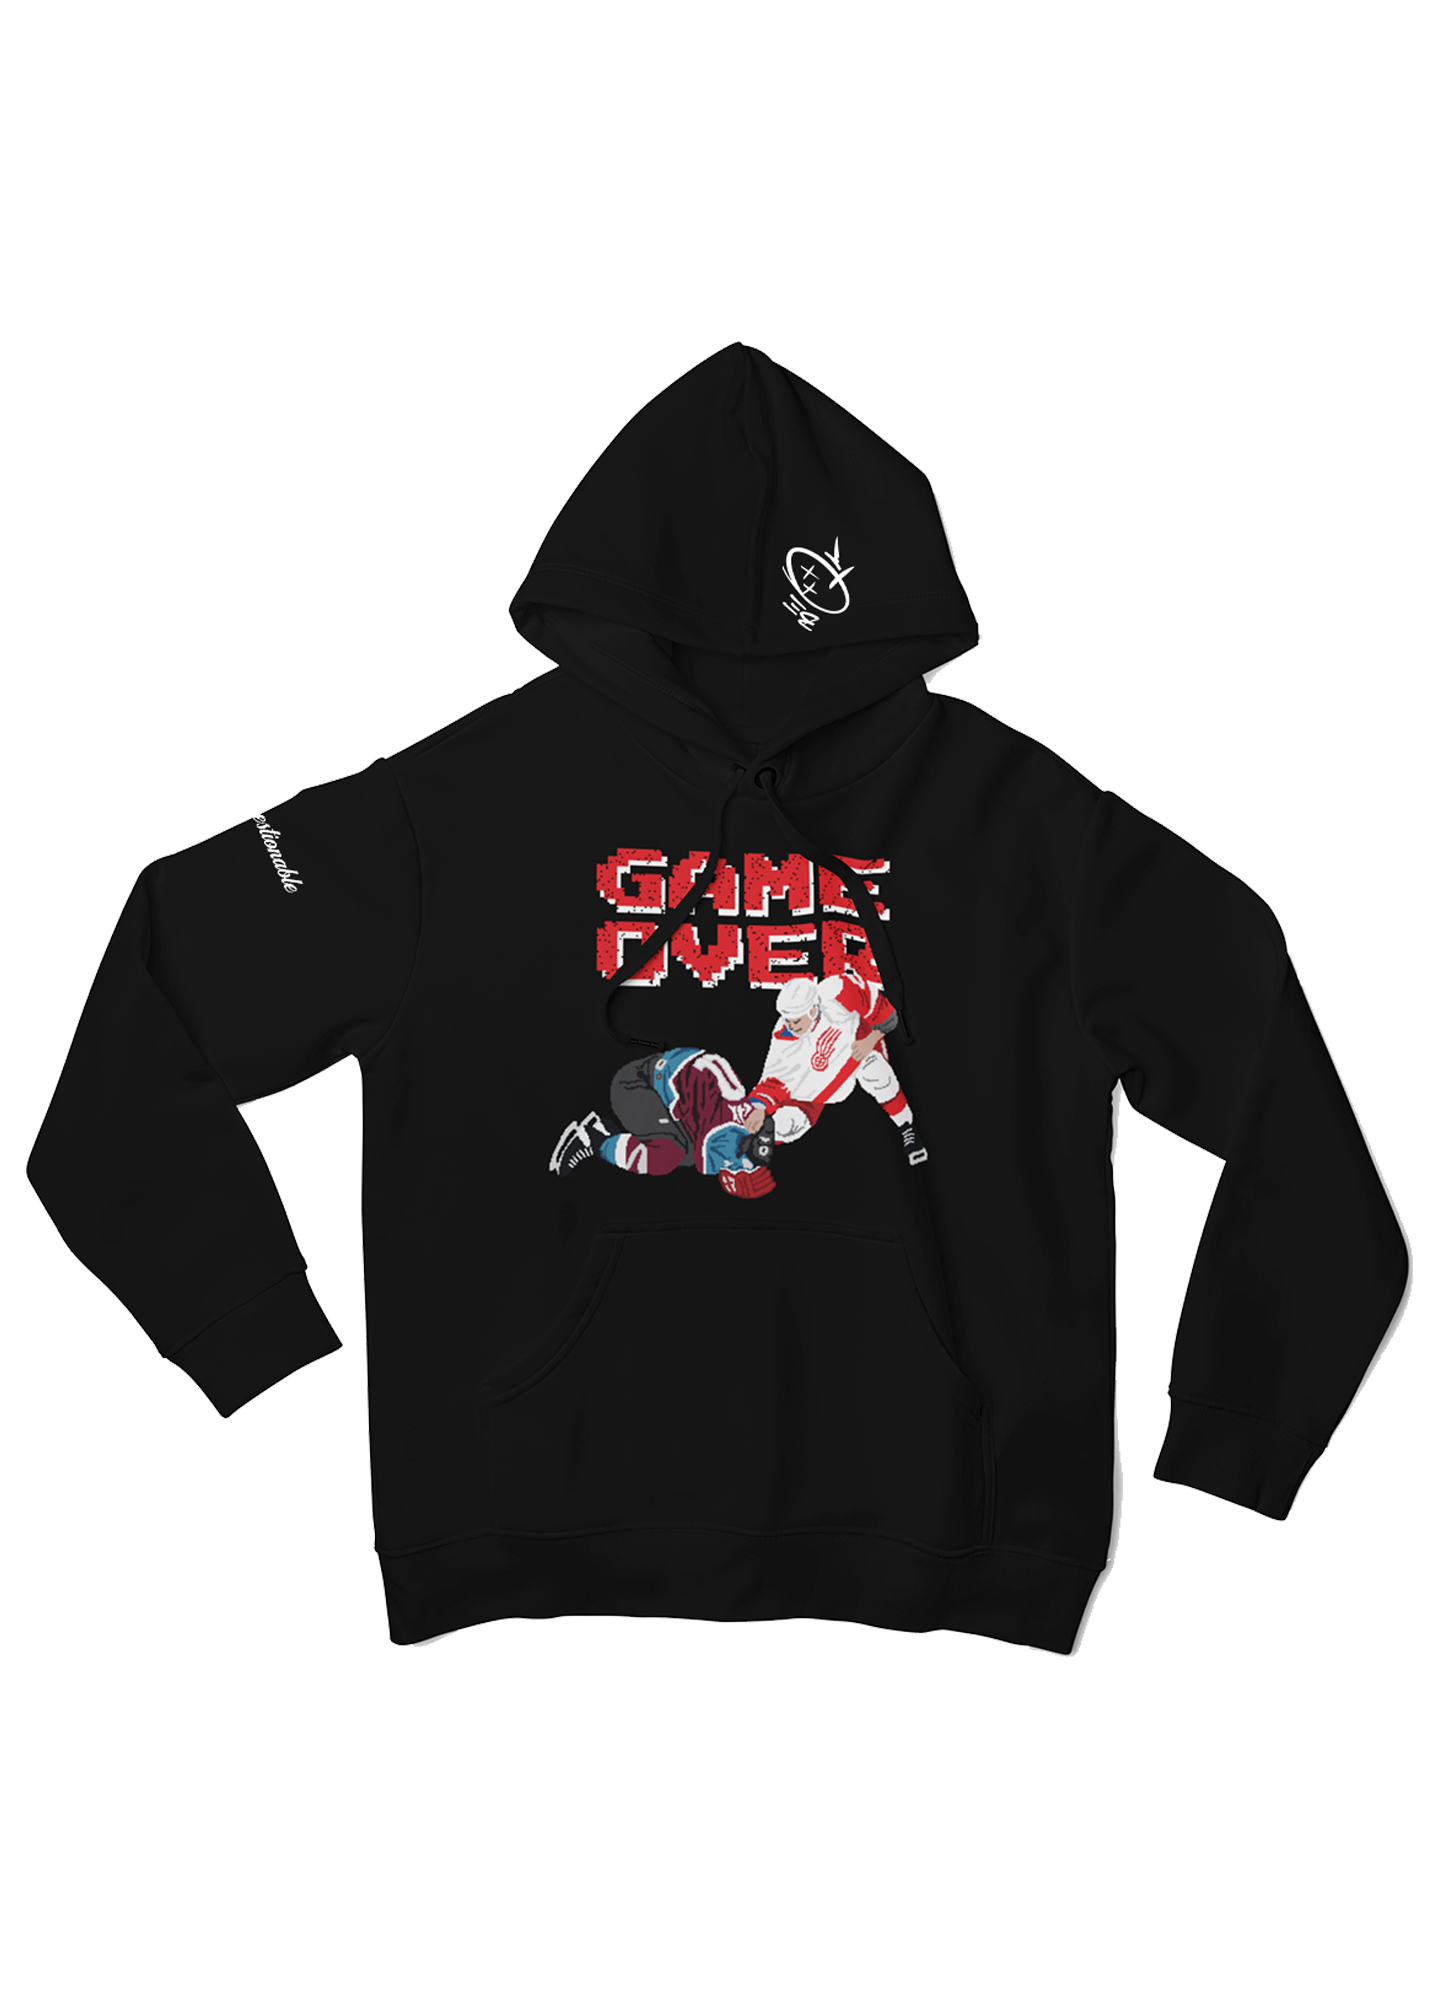 Fight Night at the Joe "Game Over" Hoodie